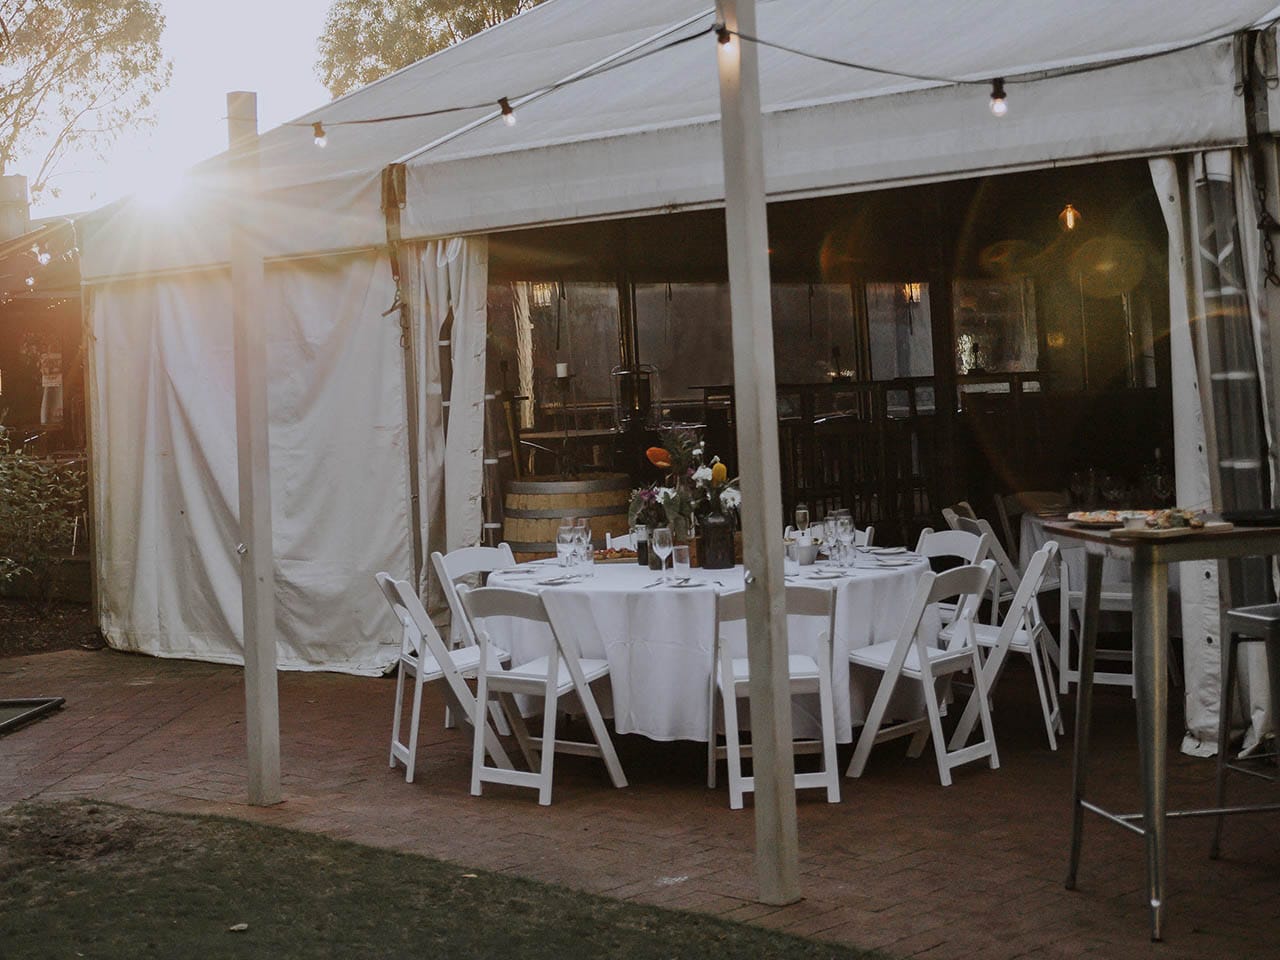 The Tent At Leapfrogs Set Up For A Dinner With Fairy-lights